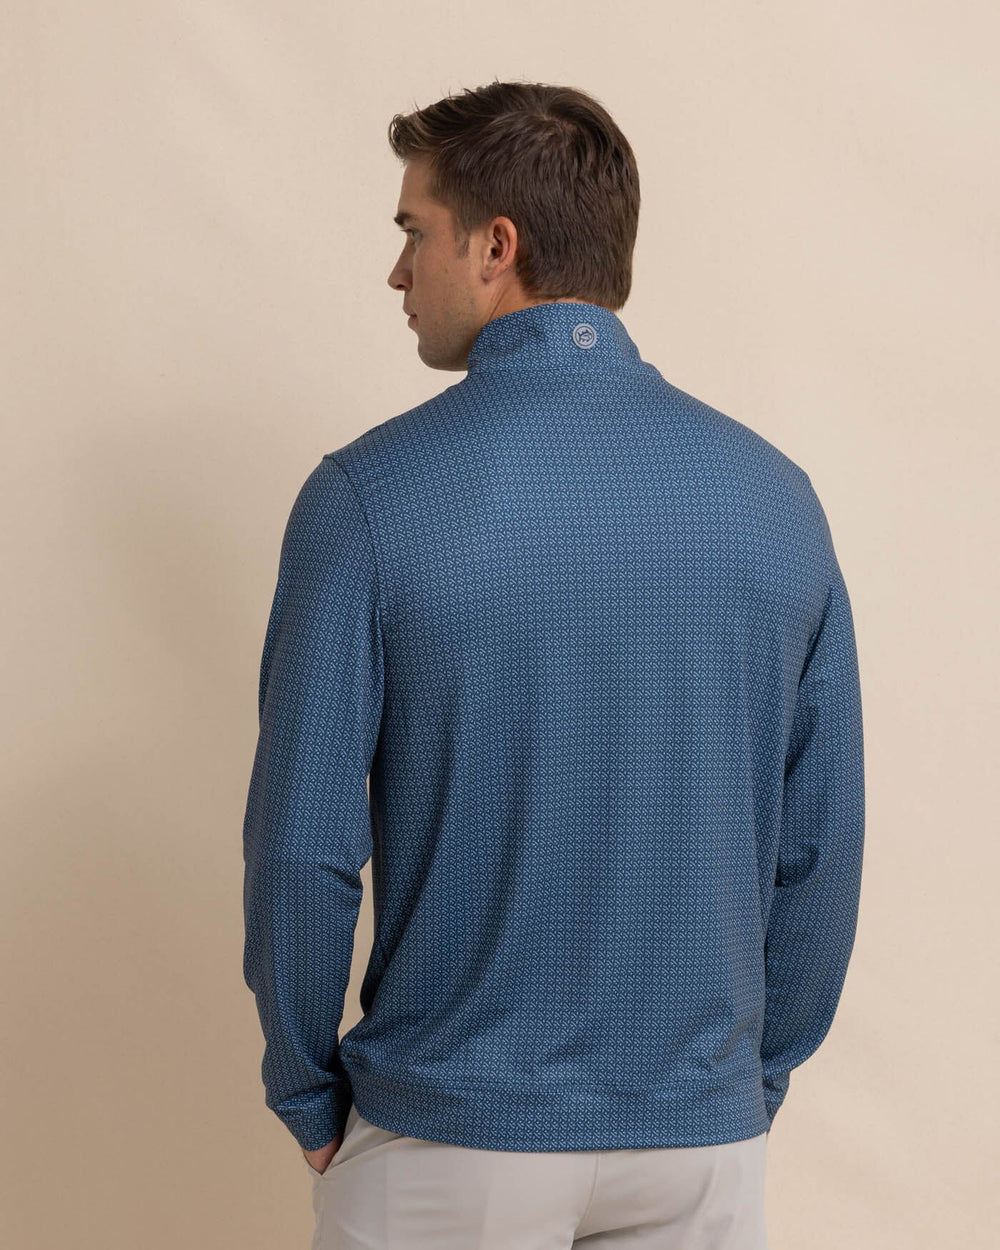 The back view of the Southern Tide Clubbin It Print Cruiser Quarter Zip by Southern Tide - Aged Denim